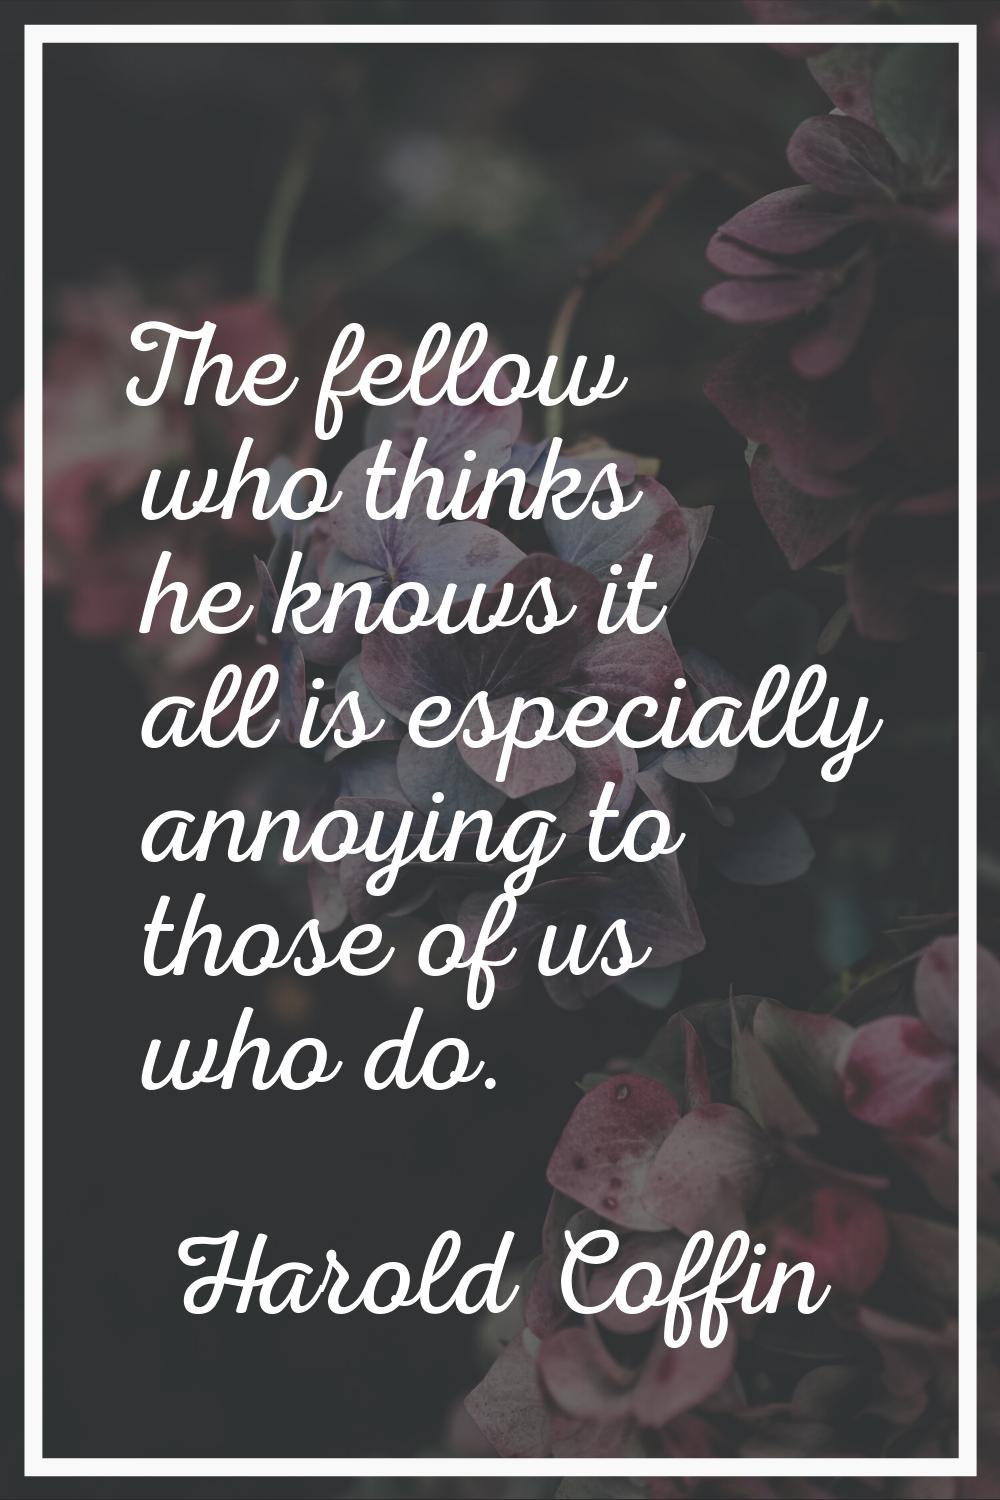 The fellow who thinks he knows it all is especially annoying to those of us who do.